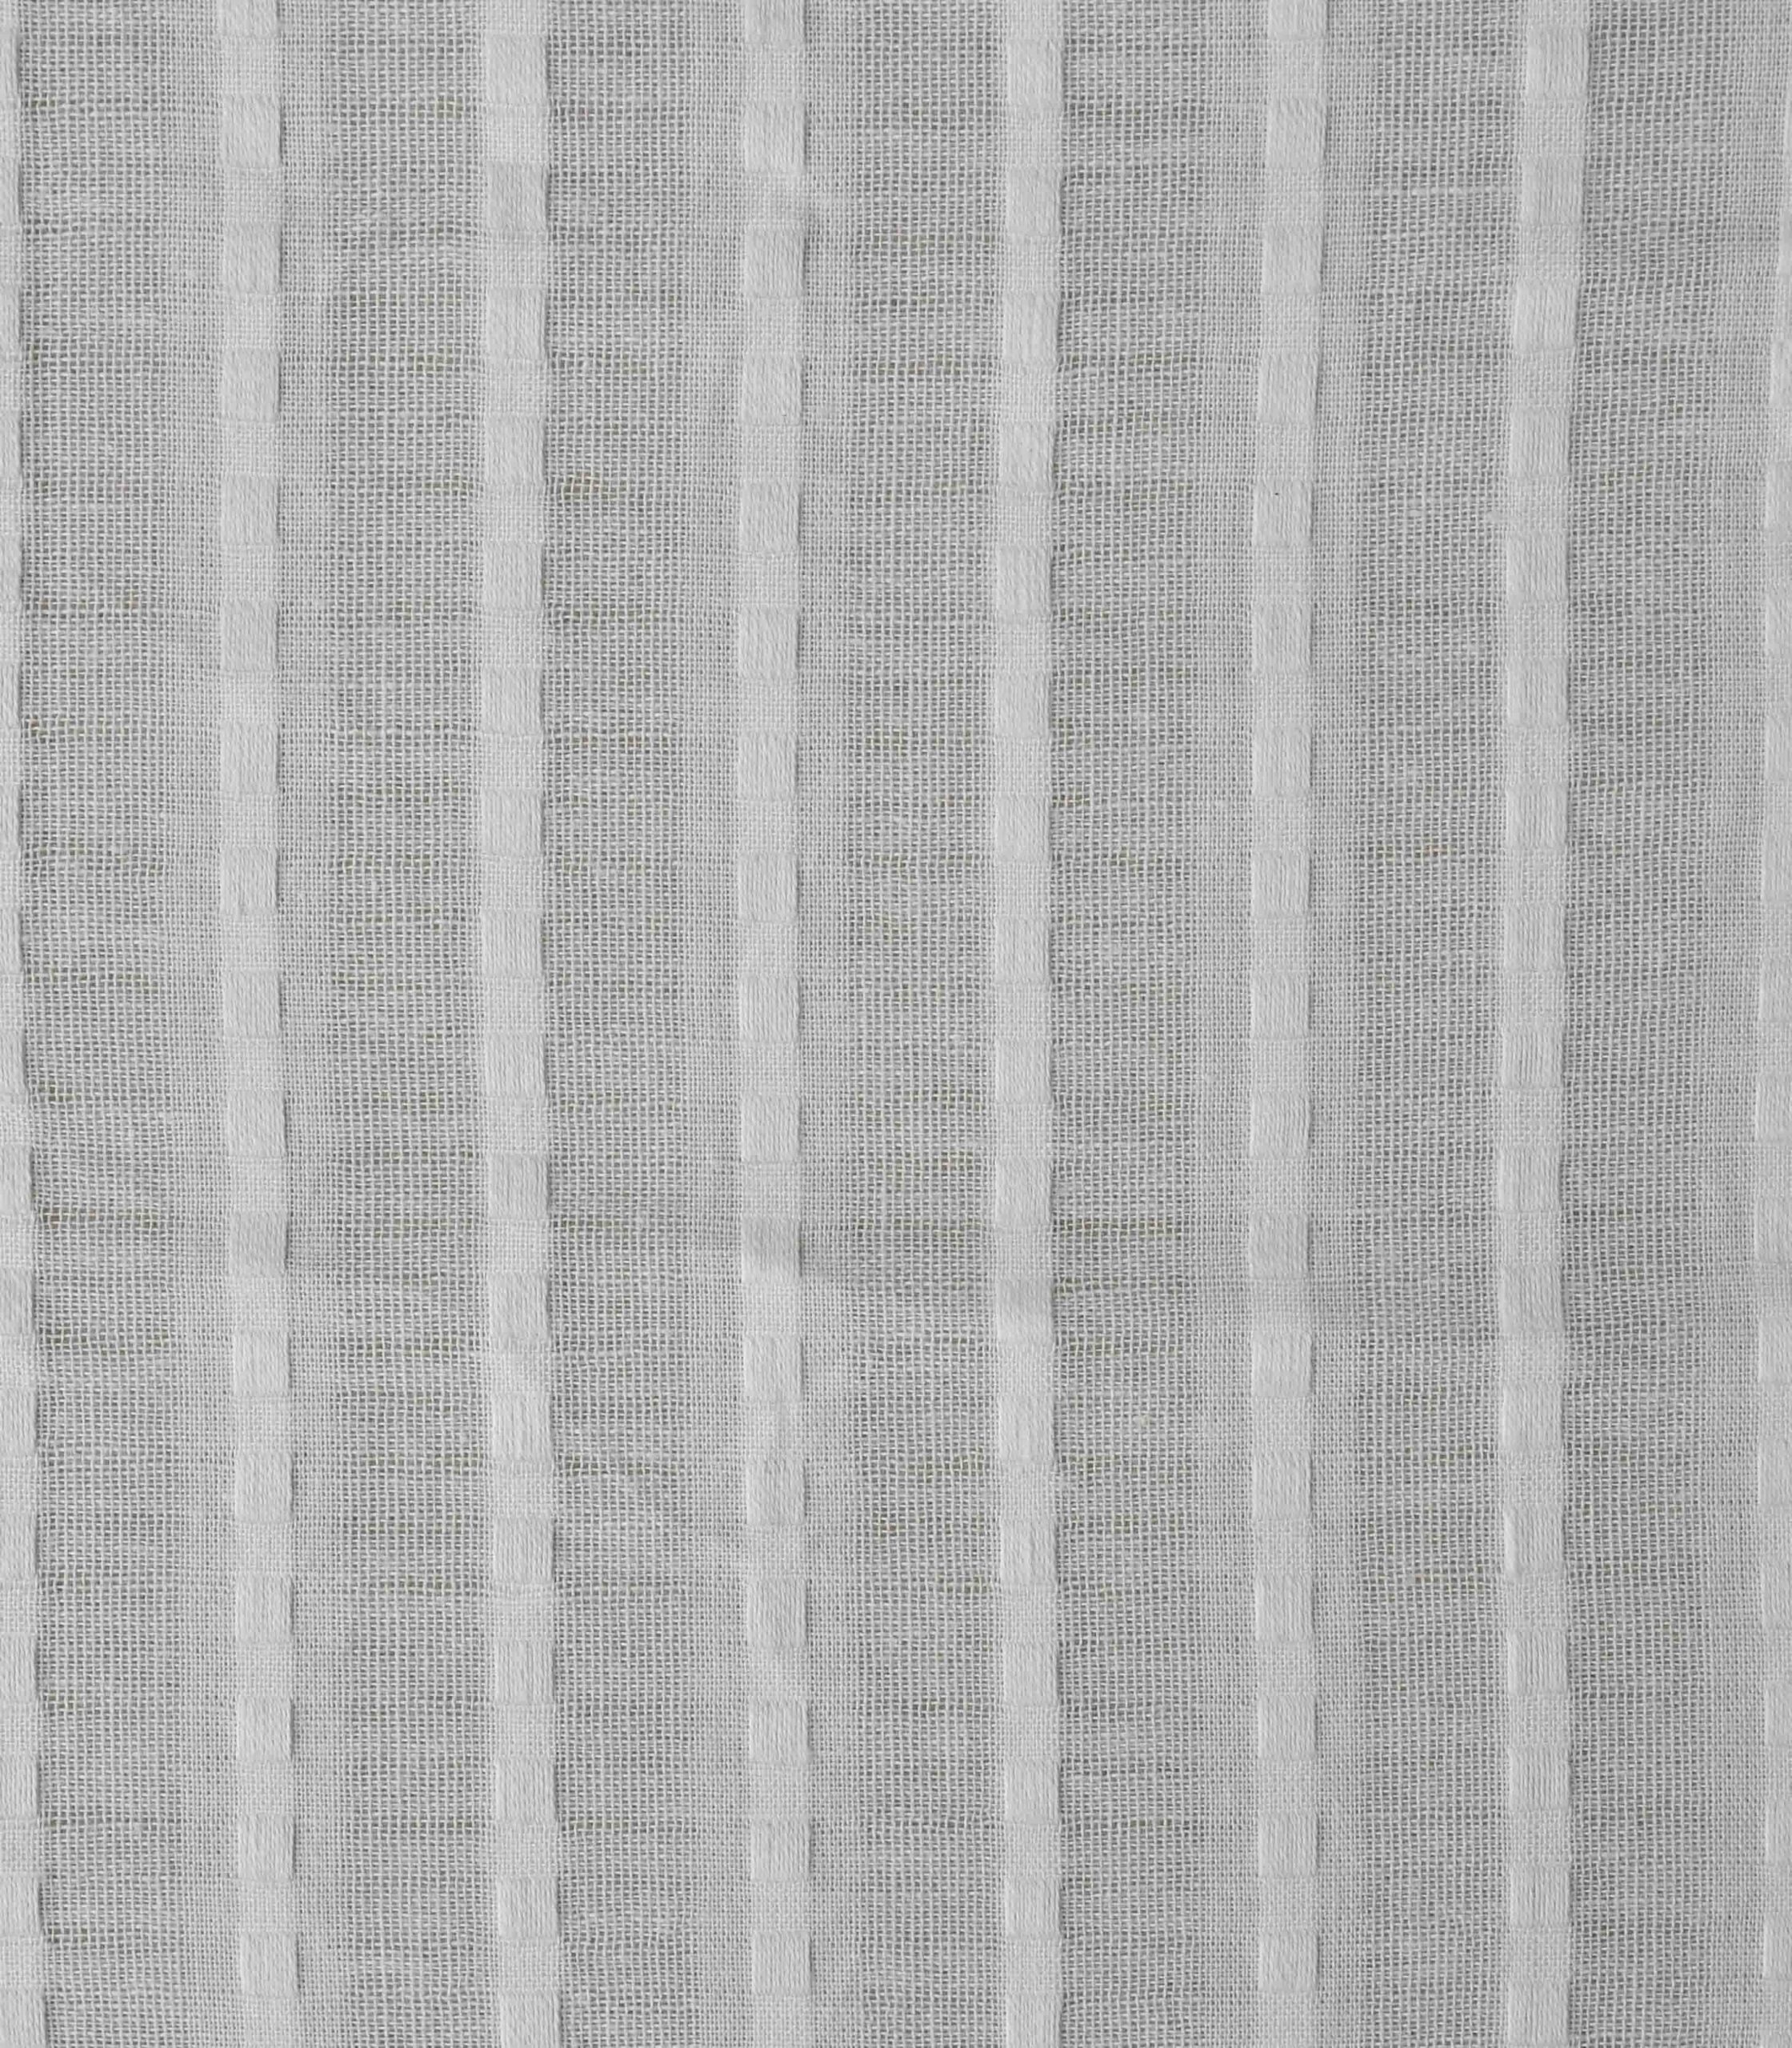 Pure Cotton Dobby RFD Woven Fabric (FC-3572R) - Dinesh Exports